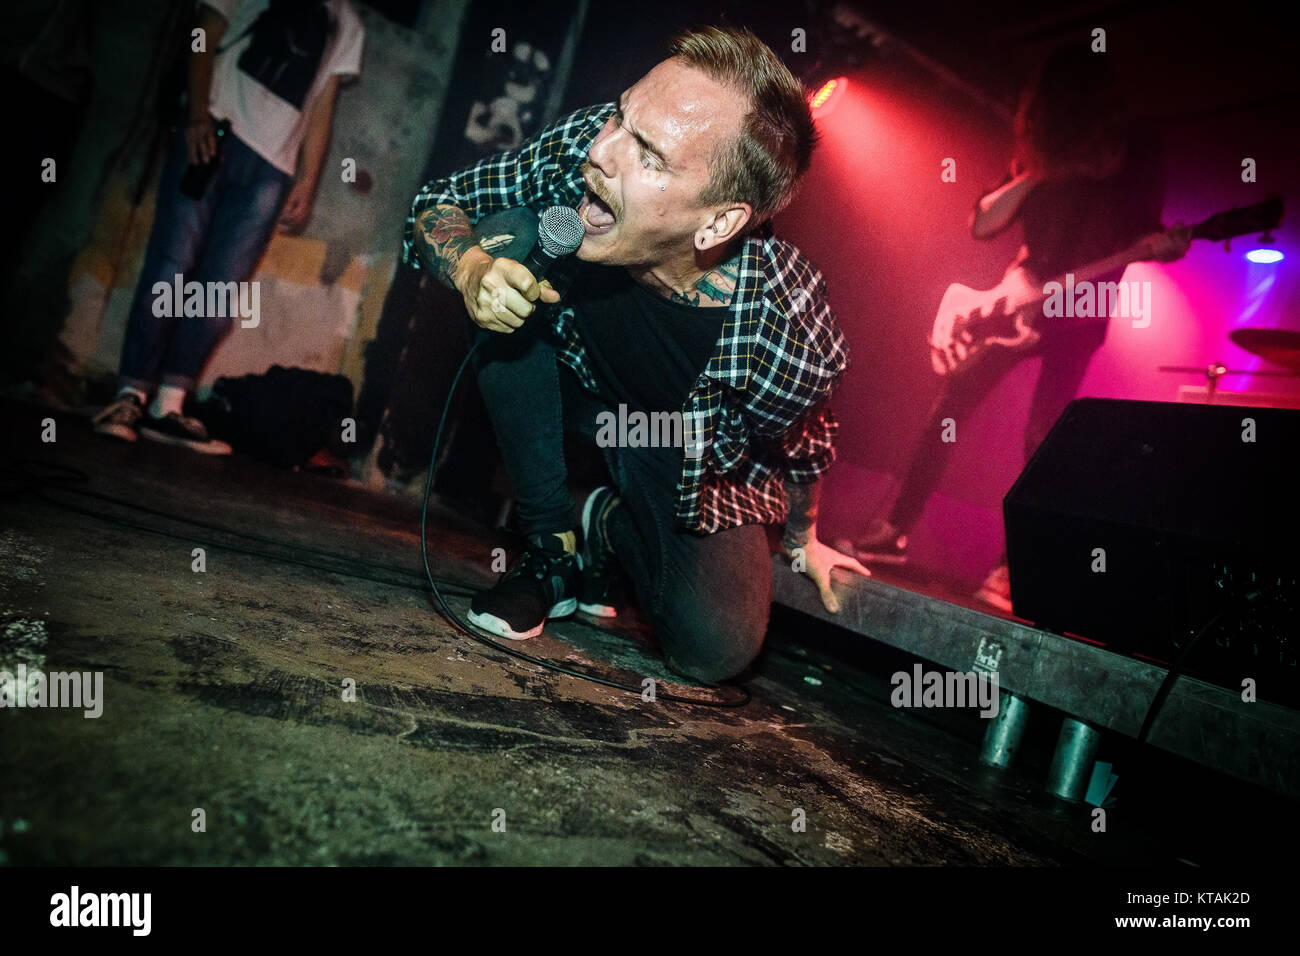 The American hardcore punk band Trash Talk performs a live concert at  Pumpehuset in Copenhagen. Here vocalist Lee Spielman is seen among the  concert crowds. Denmark, 13/03 2017 Stock Photo - Alamy